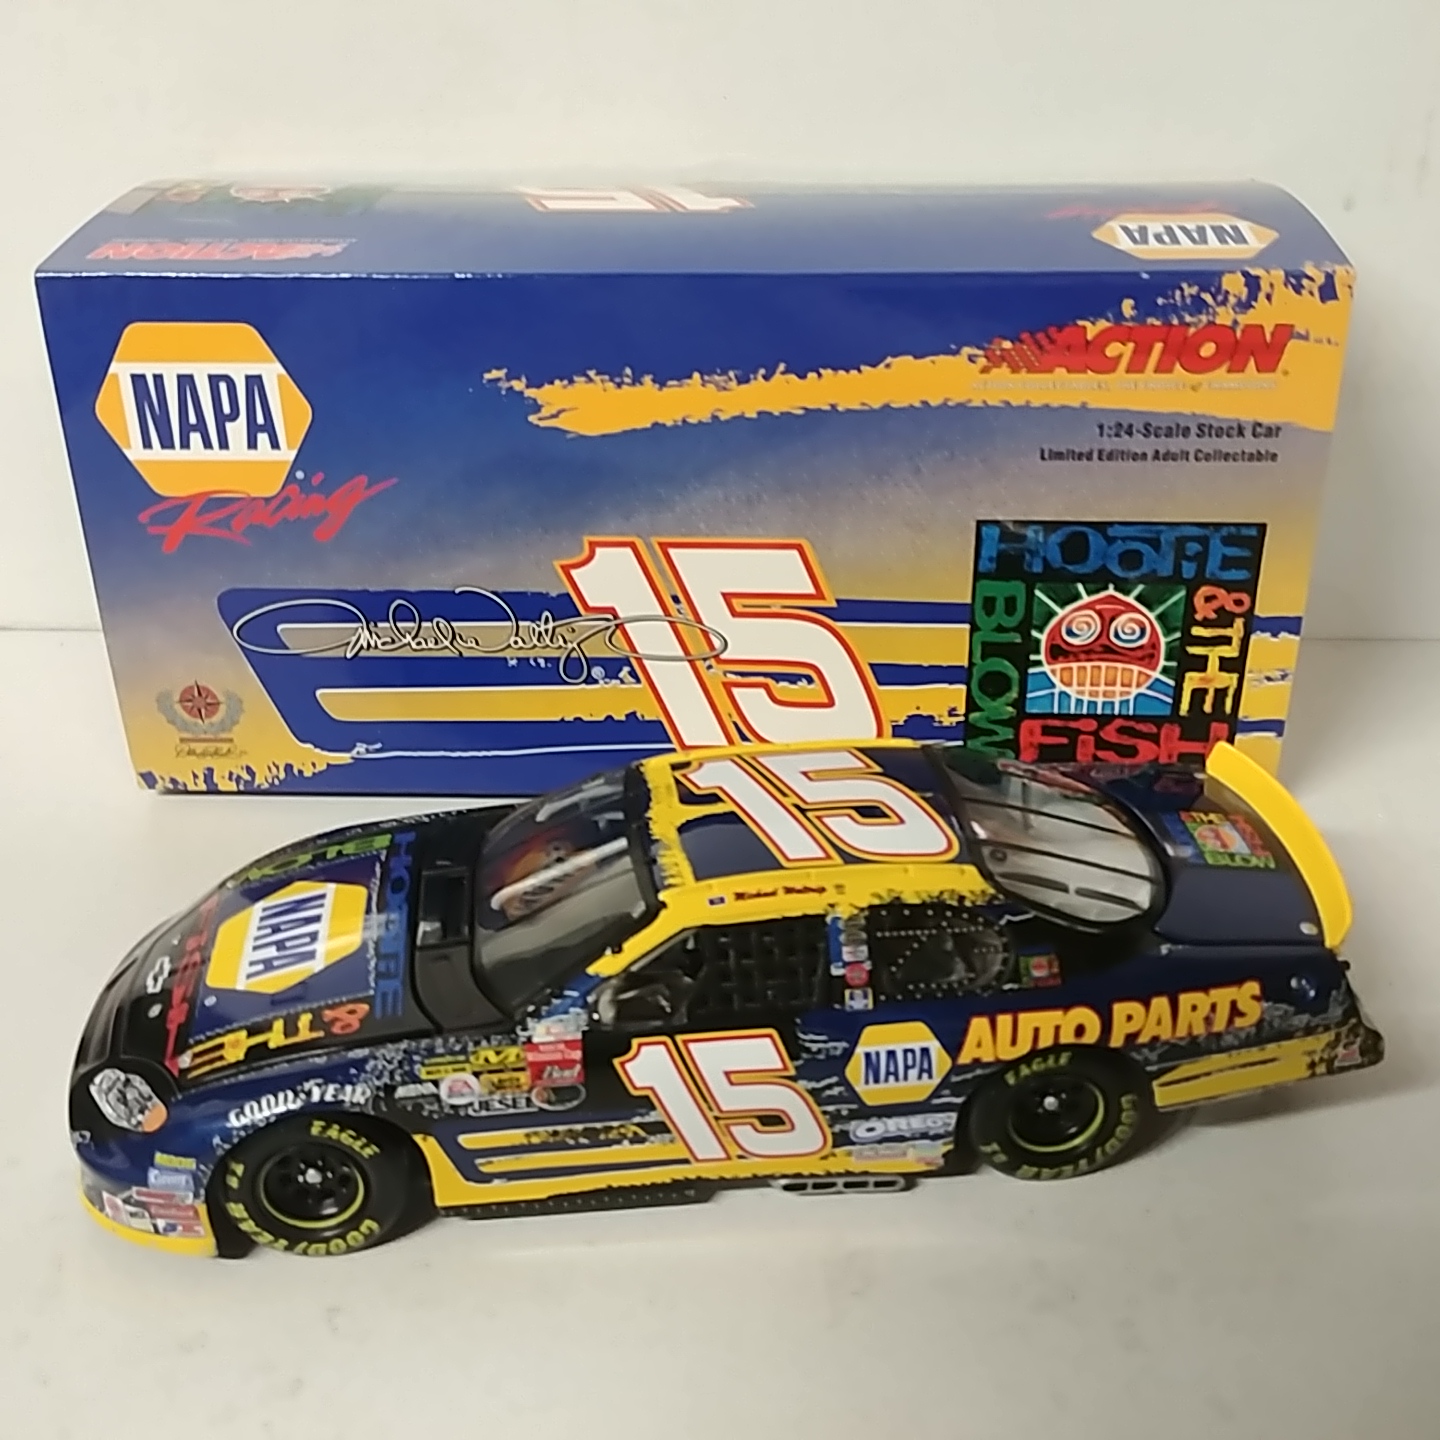 2003 Michael Waltrip 1/24th NAPA "Hootie and the Blow Fish" c/w car